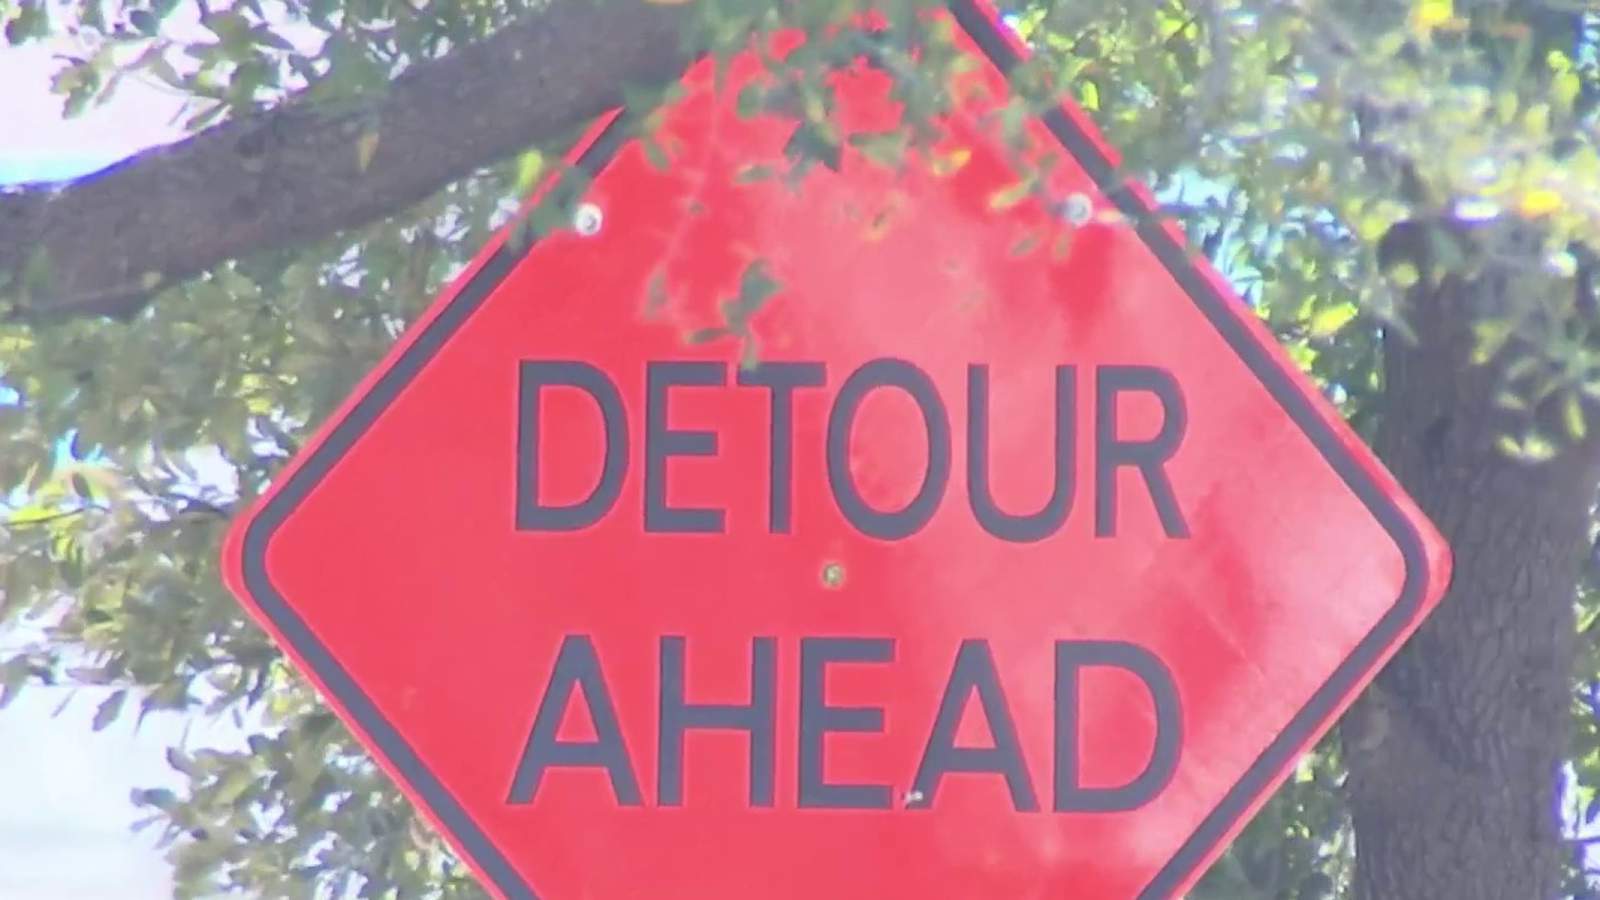 I-4 on ramp to close for six months